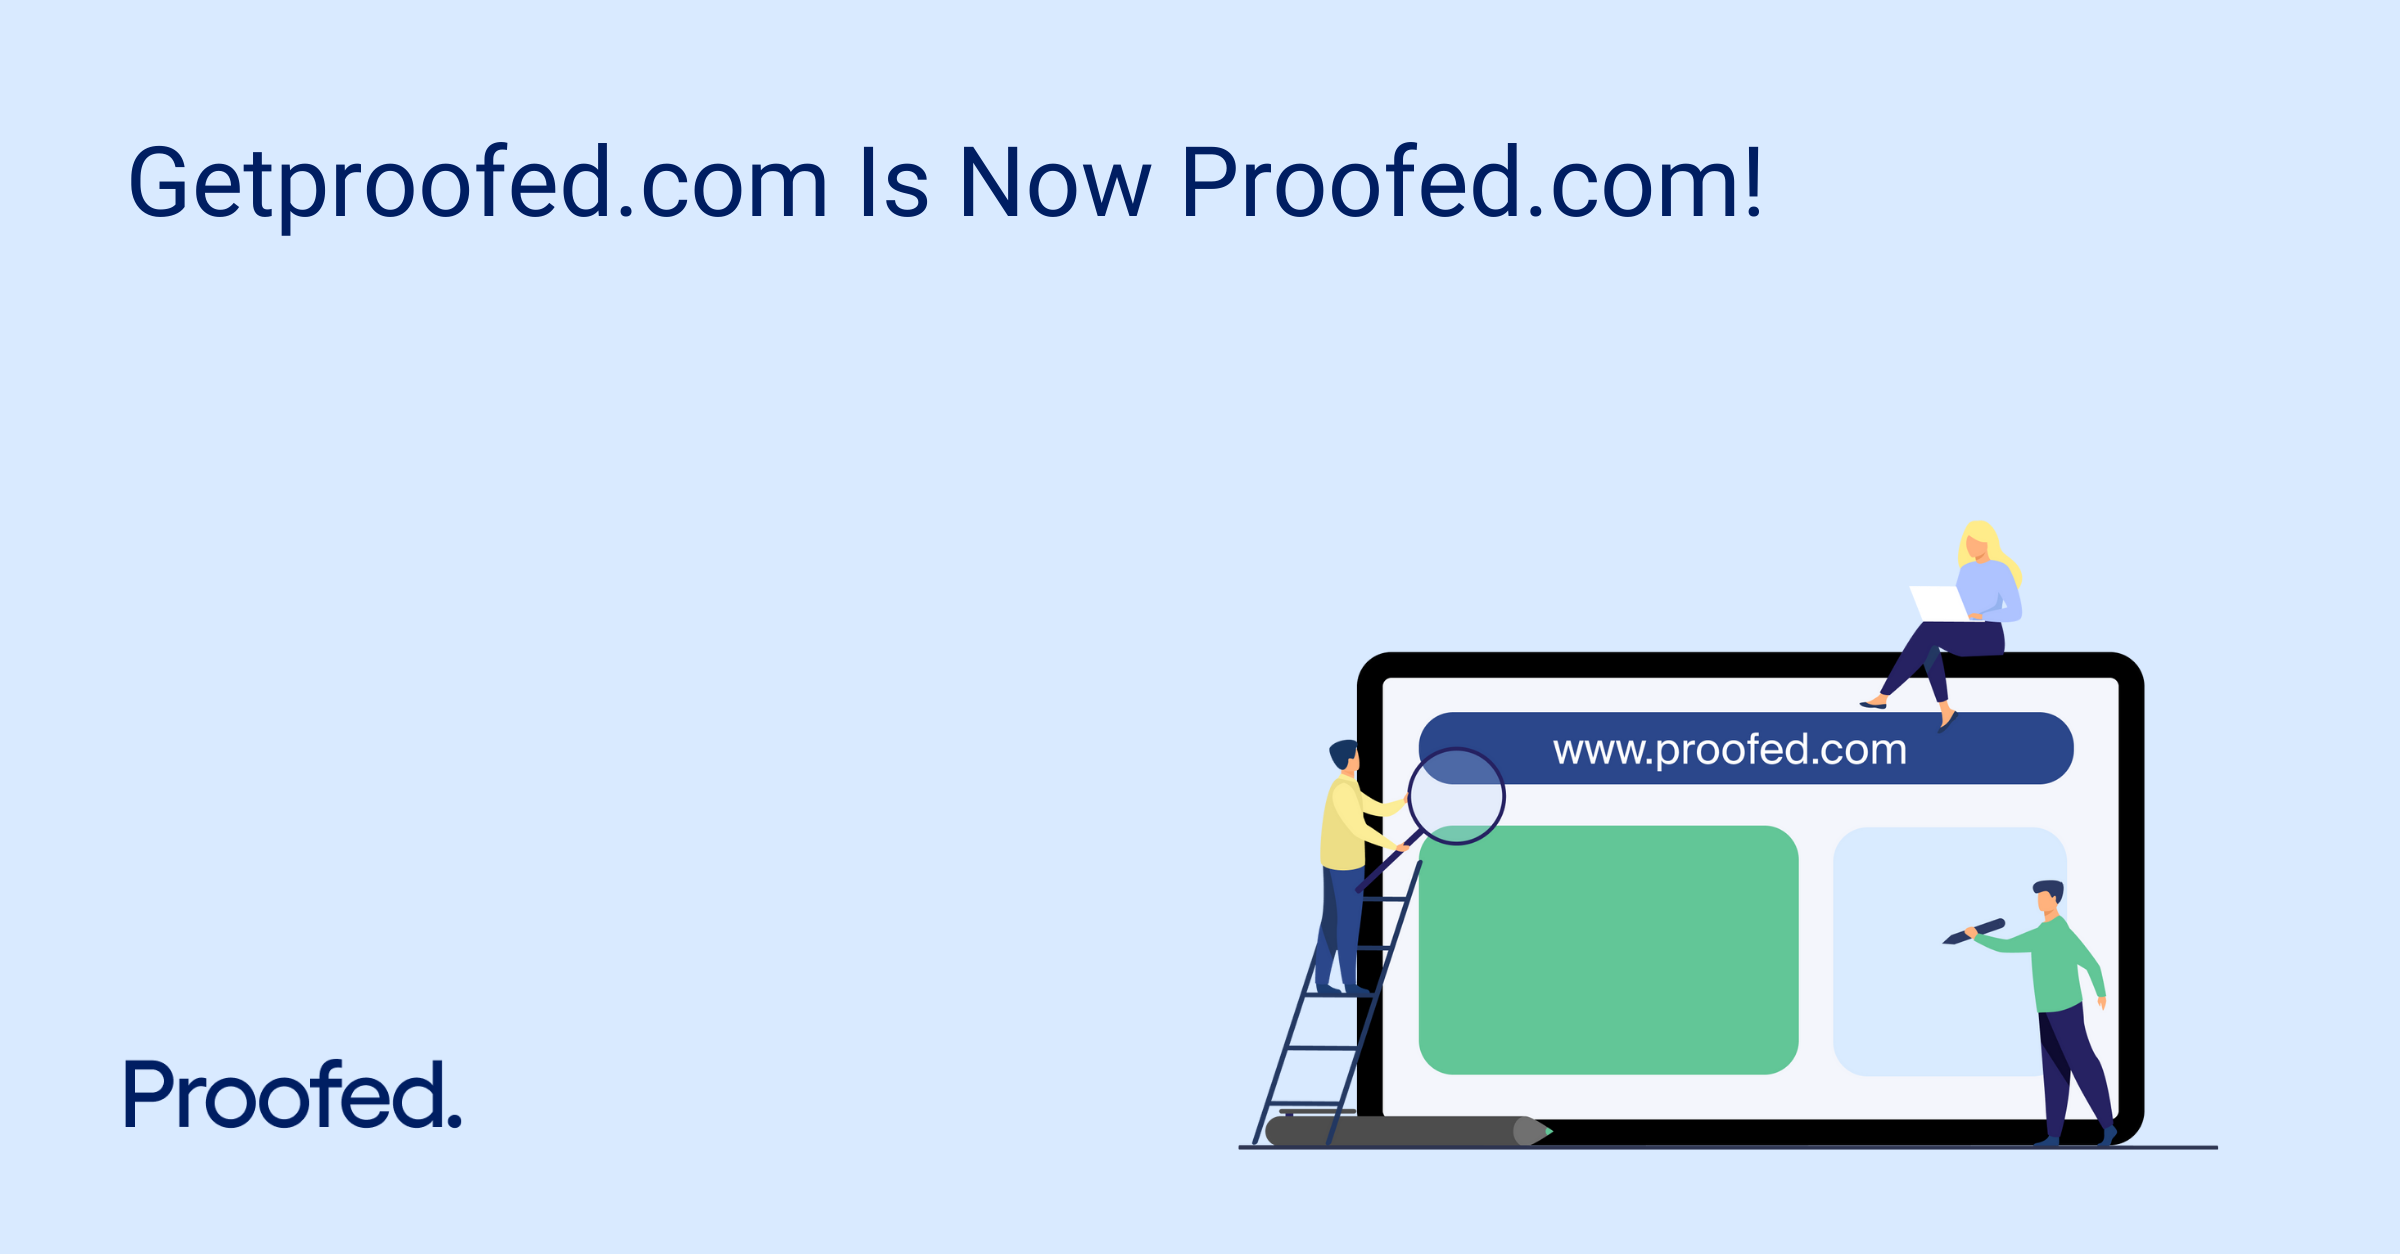 <a></a>Proofed US Domain Changes to Proofed.com